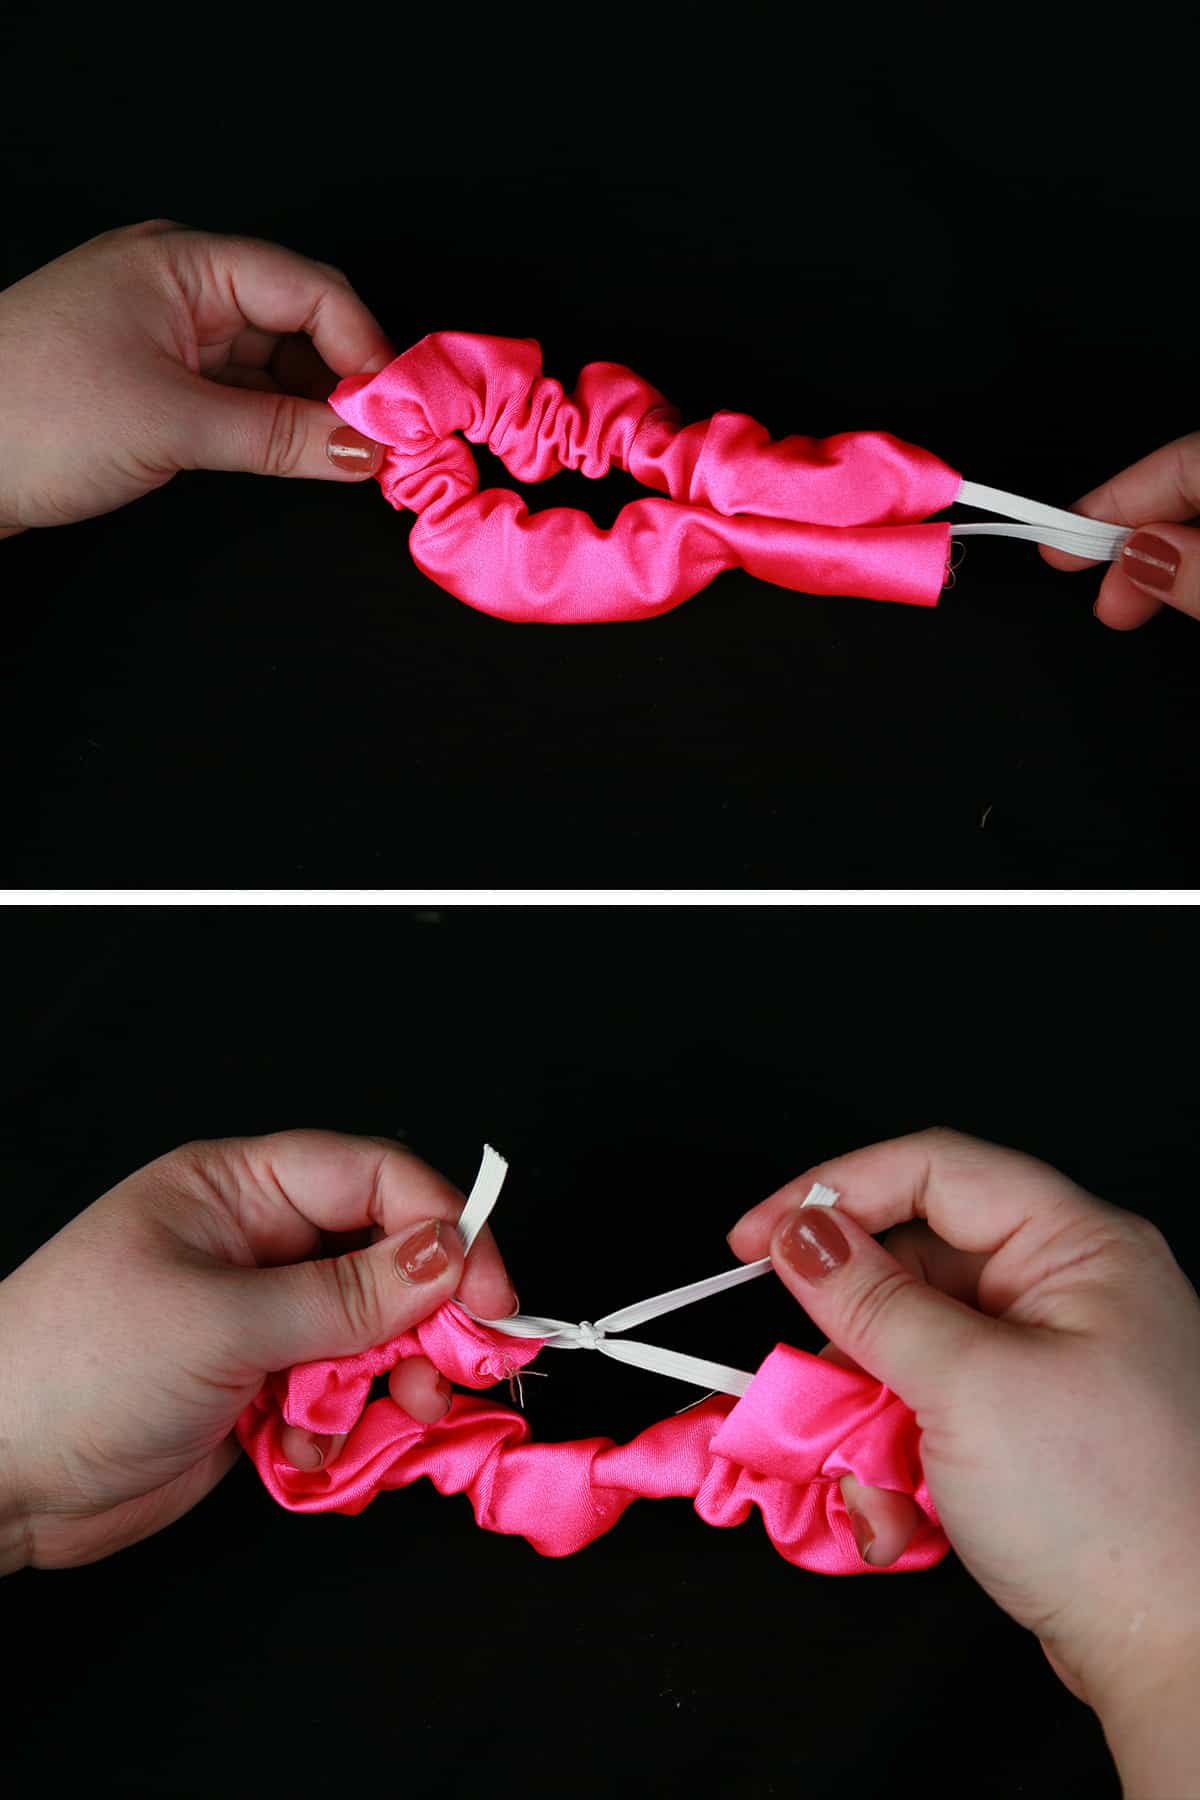 A two part compilation image showing elastic being threaded into a scrunchie and tied off.